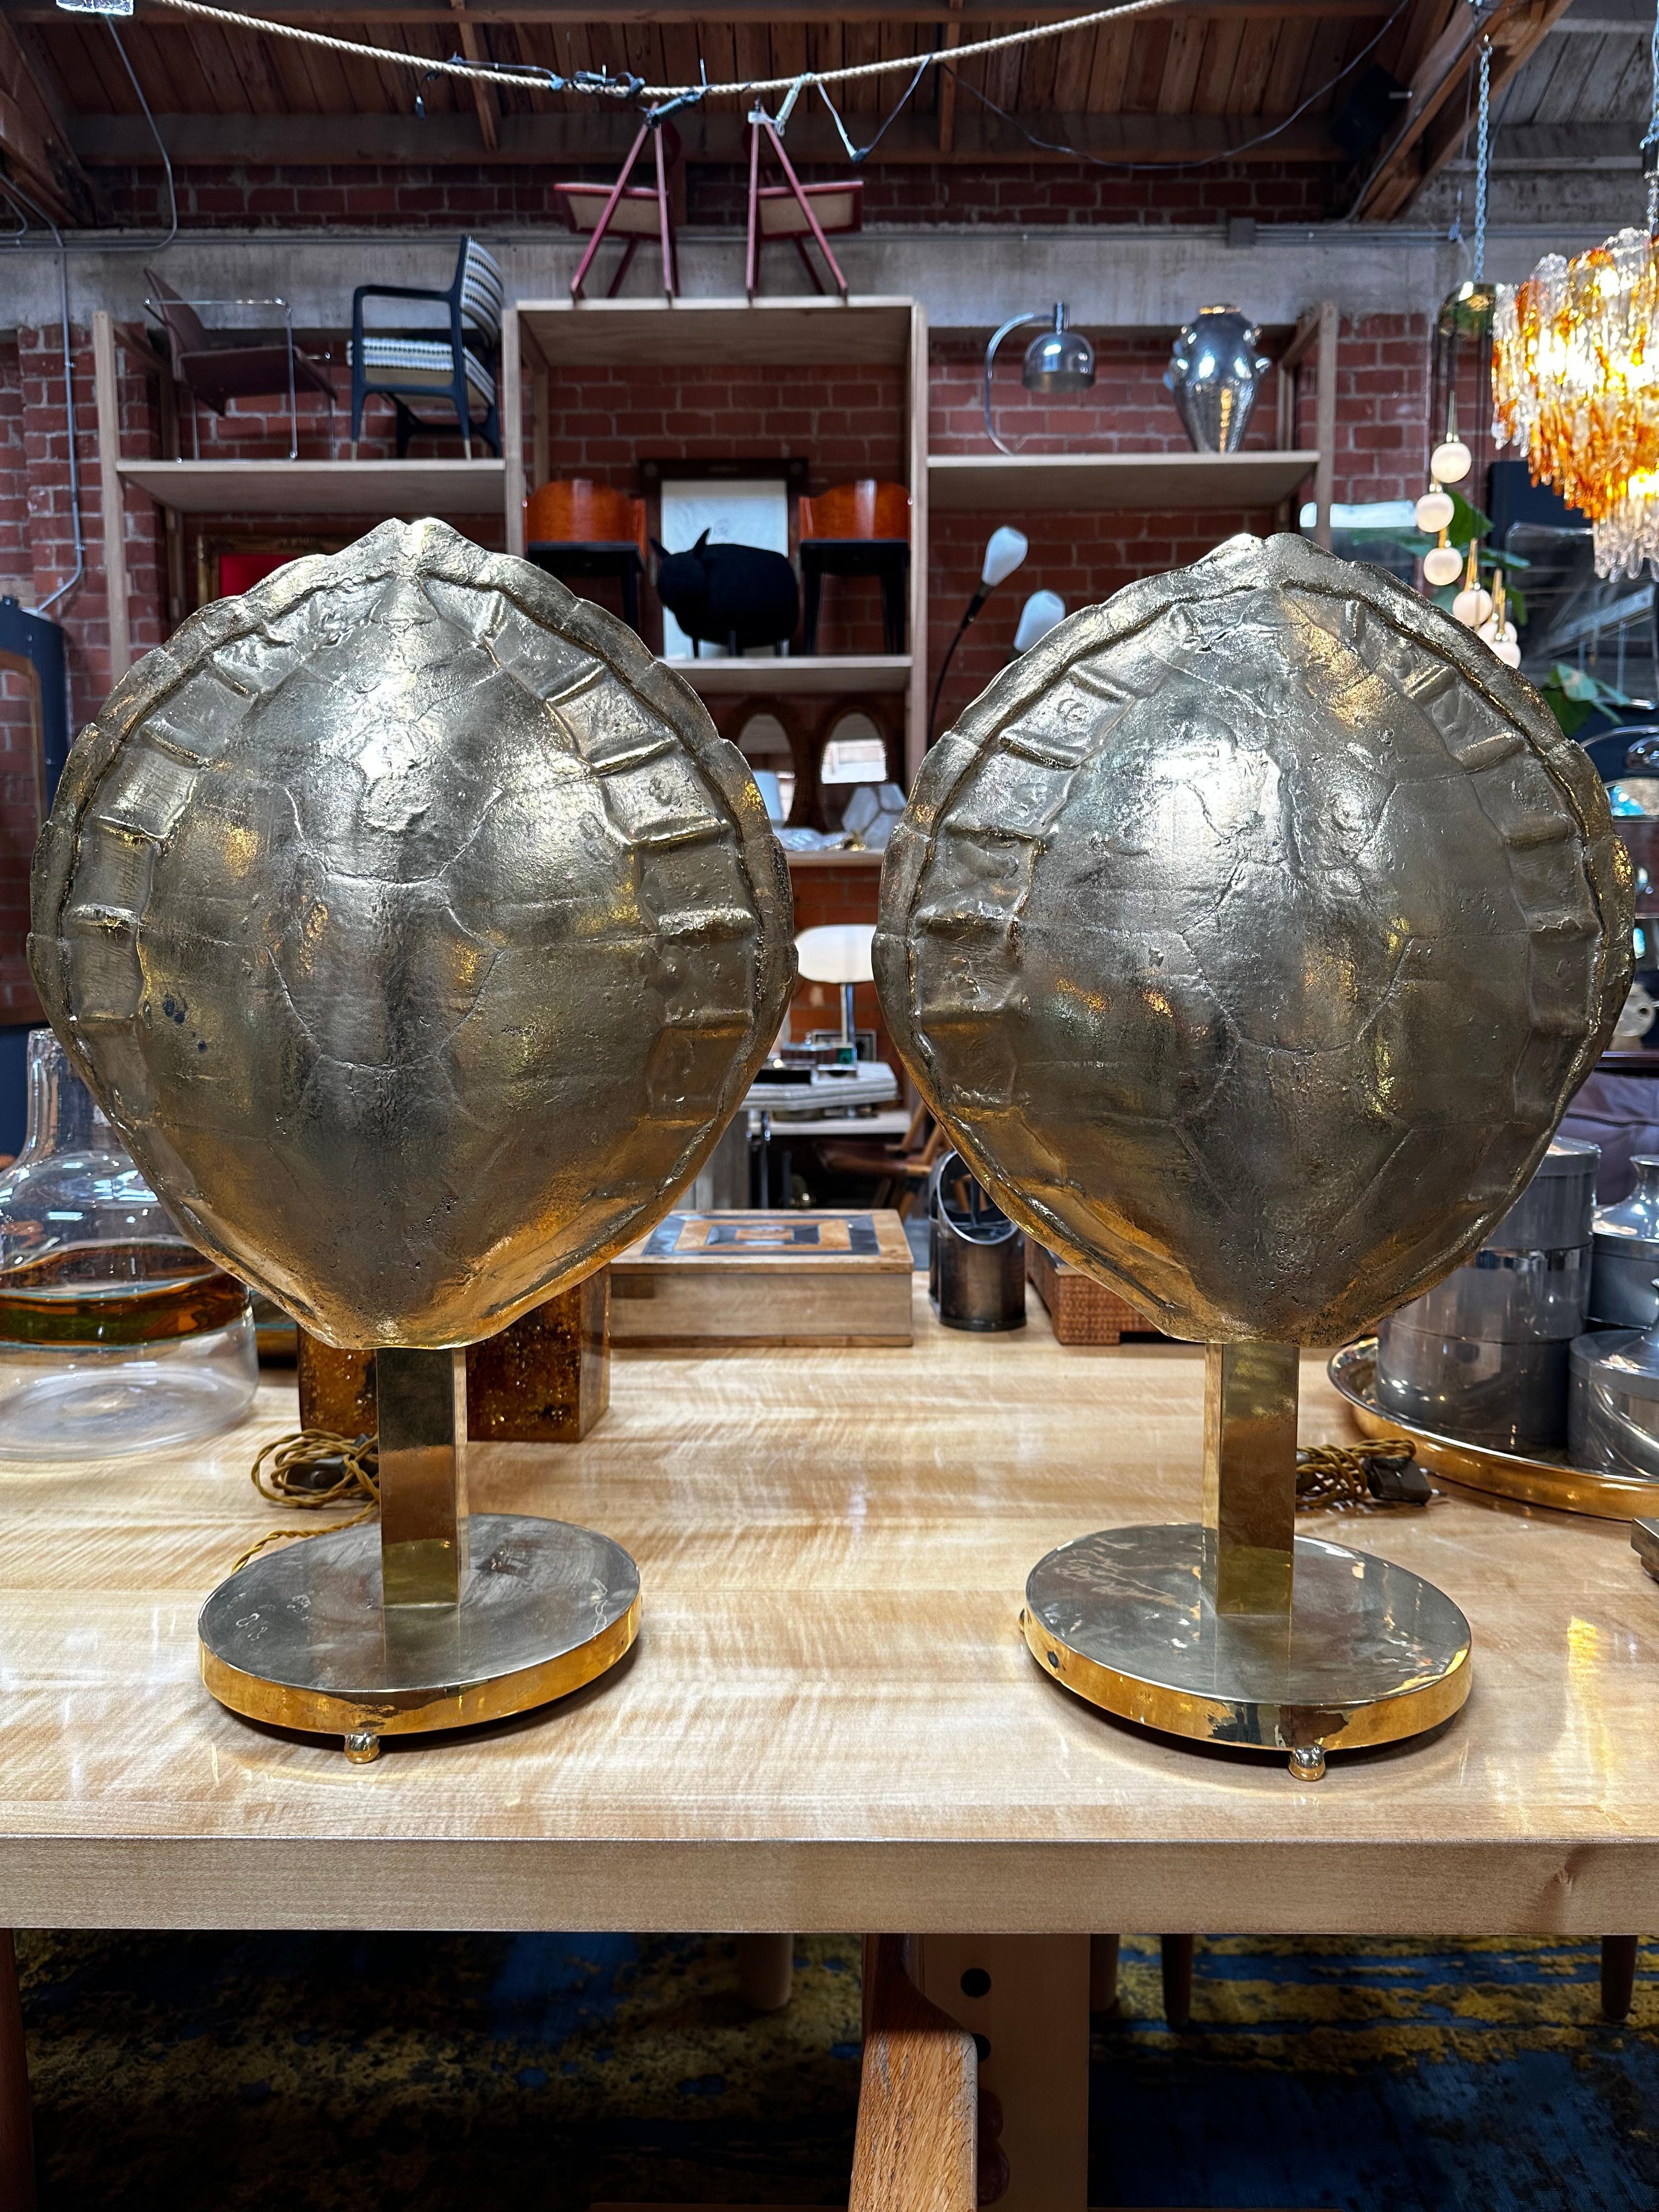 The pair of fully brass shell table lamps made in Italy in the 1960s is a beautiful example of mid-century modern lighting design. The lamps feature a fully brass shell construction, which has been worked in a way that gives the lamps a sense of